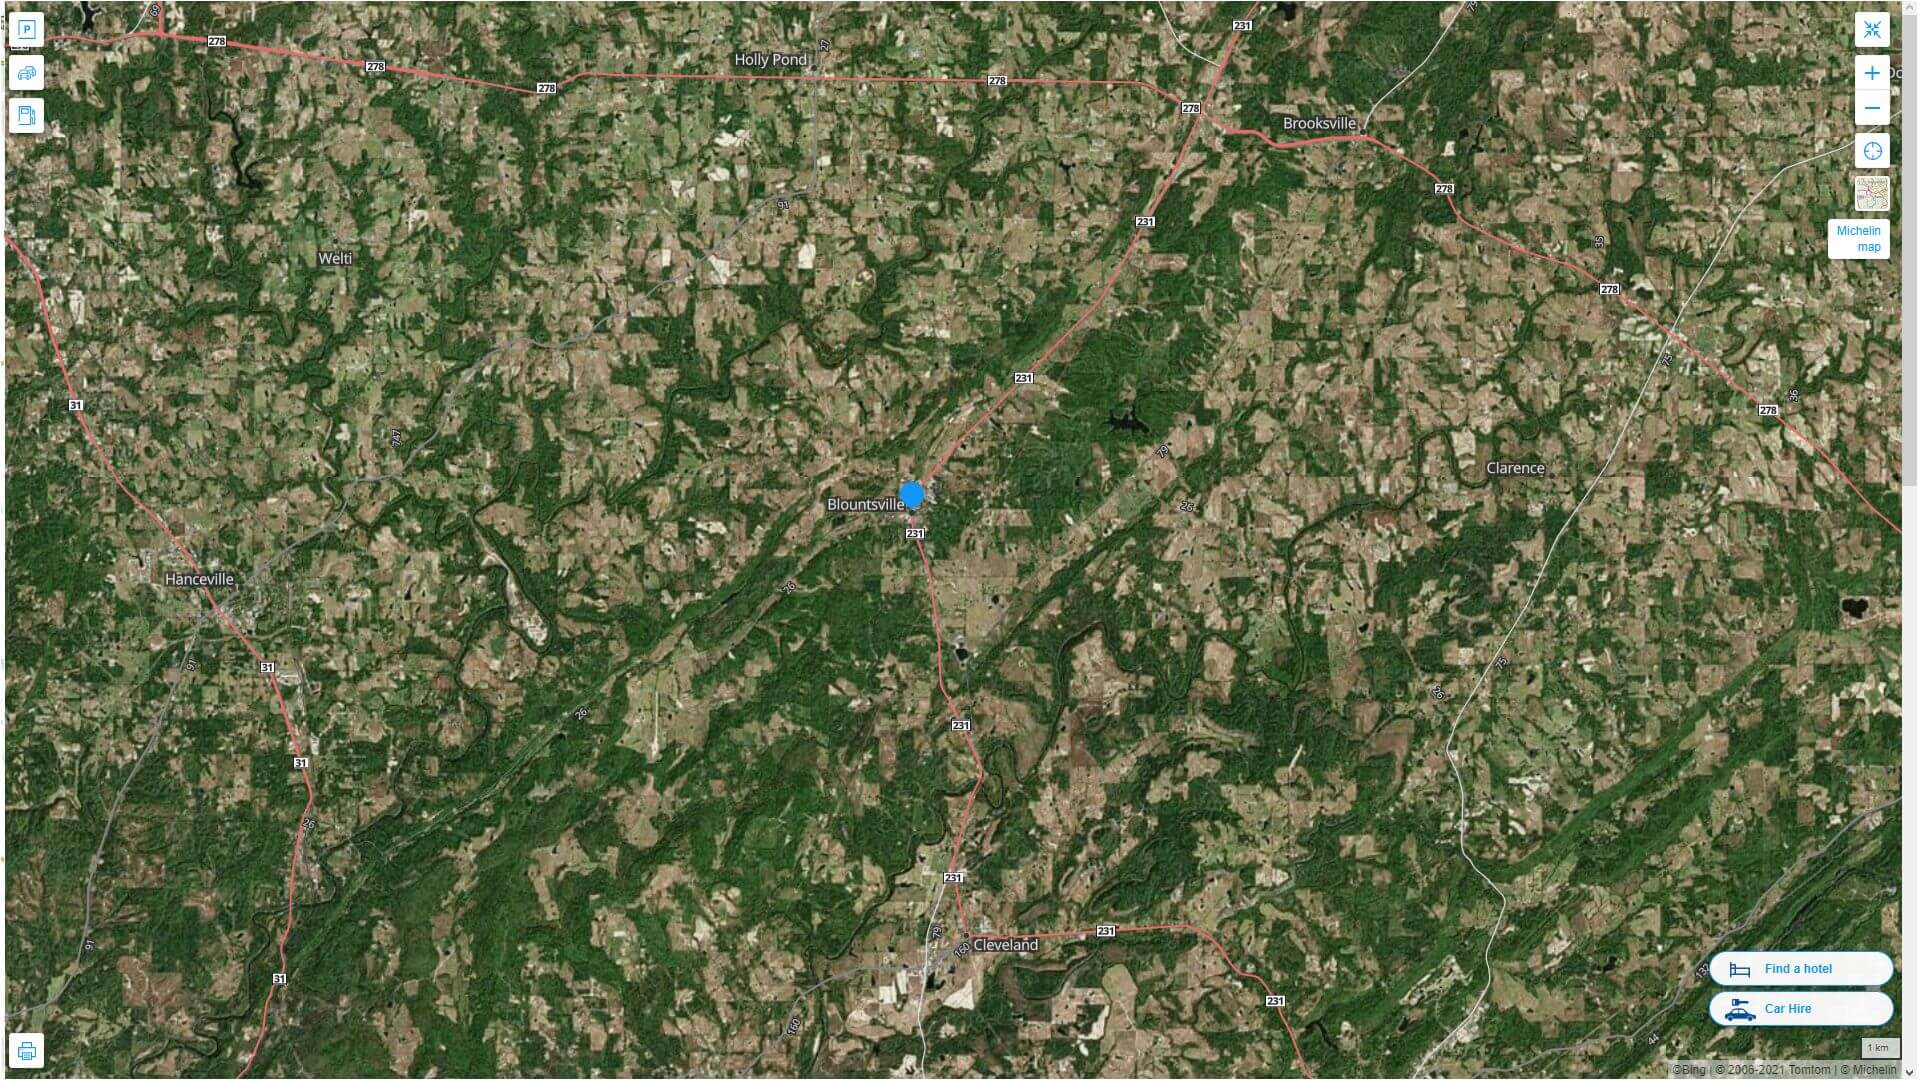 Blountsville Alabama Highway and Road Map with Satellite View